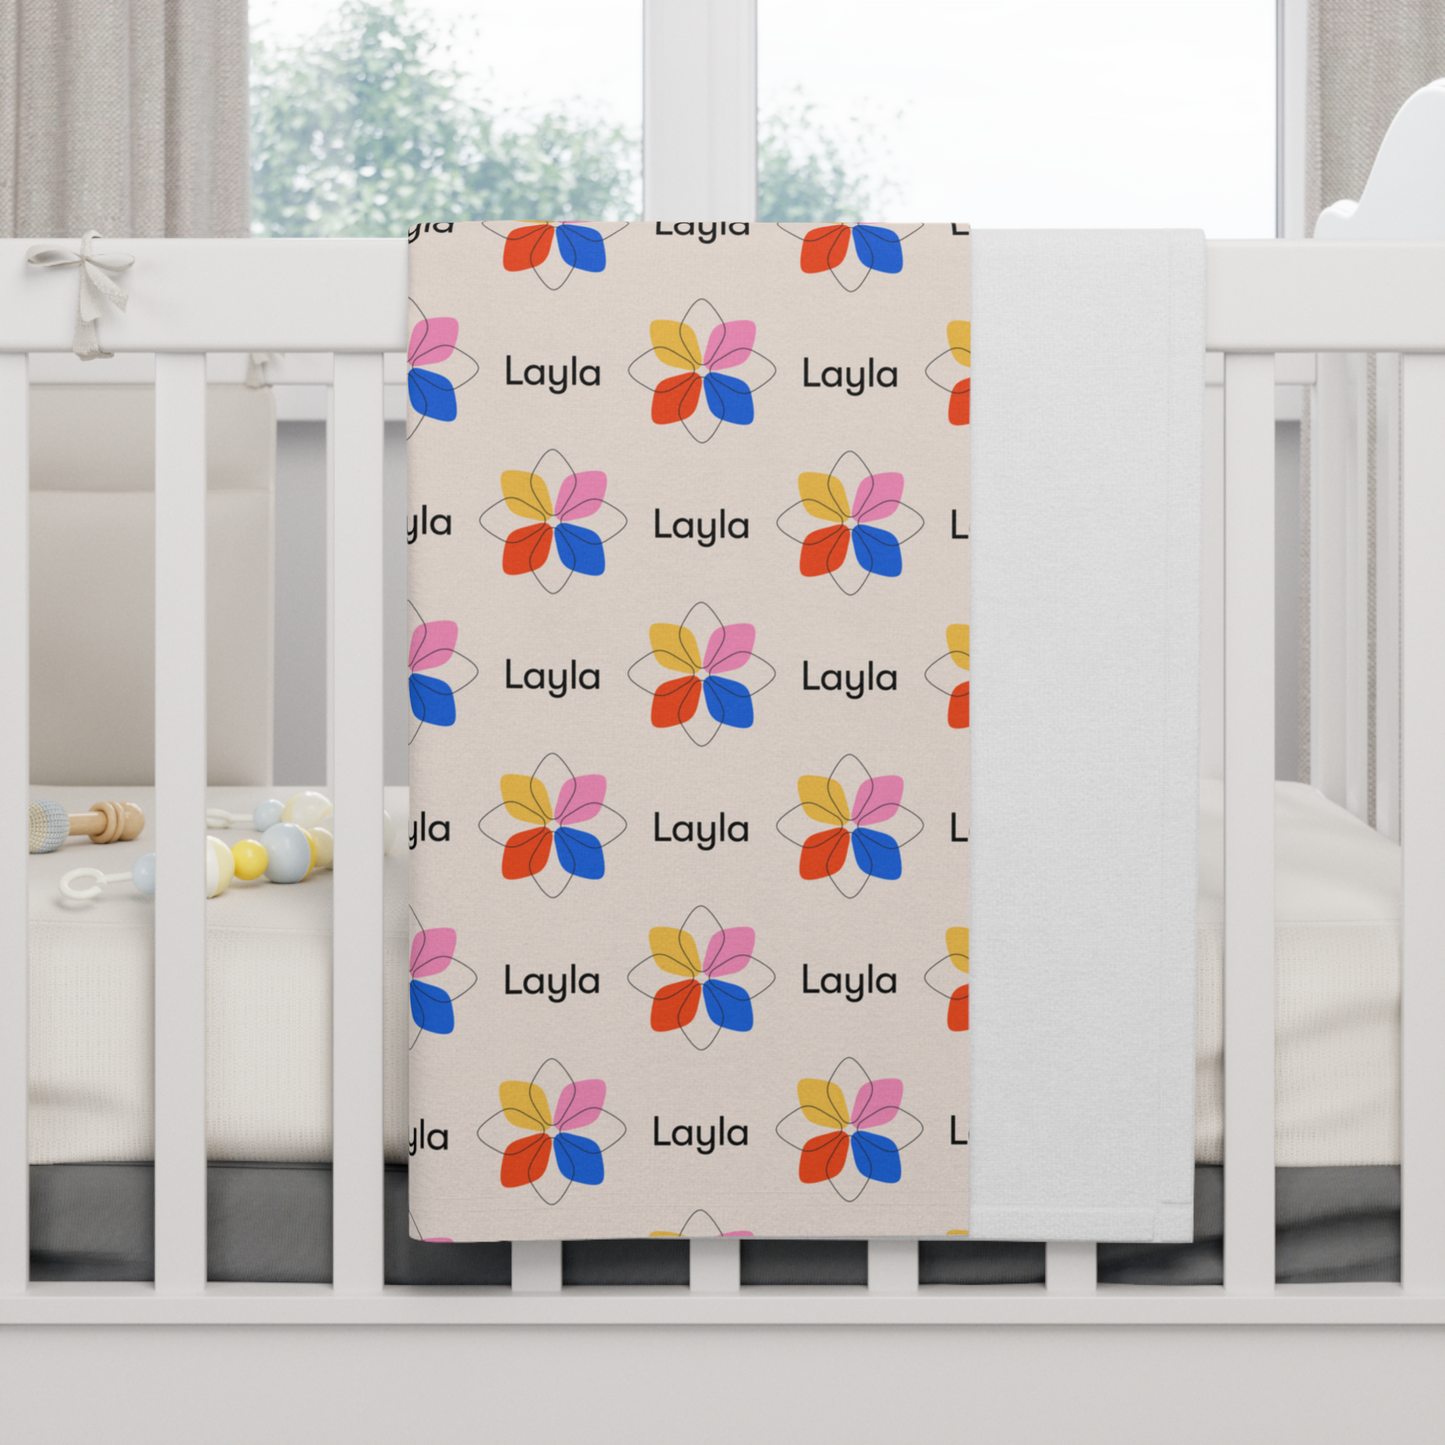 Fleece personalized baby blanket in a multi-colored boho geometric flower pattern hung over side of white crib with window in the background